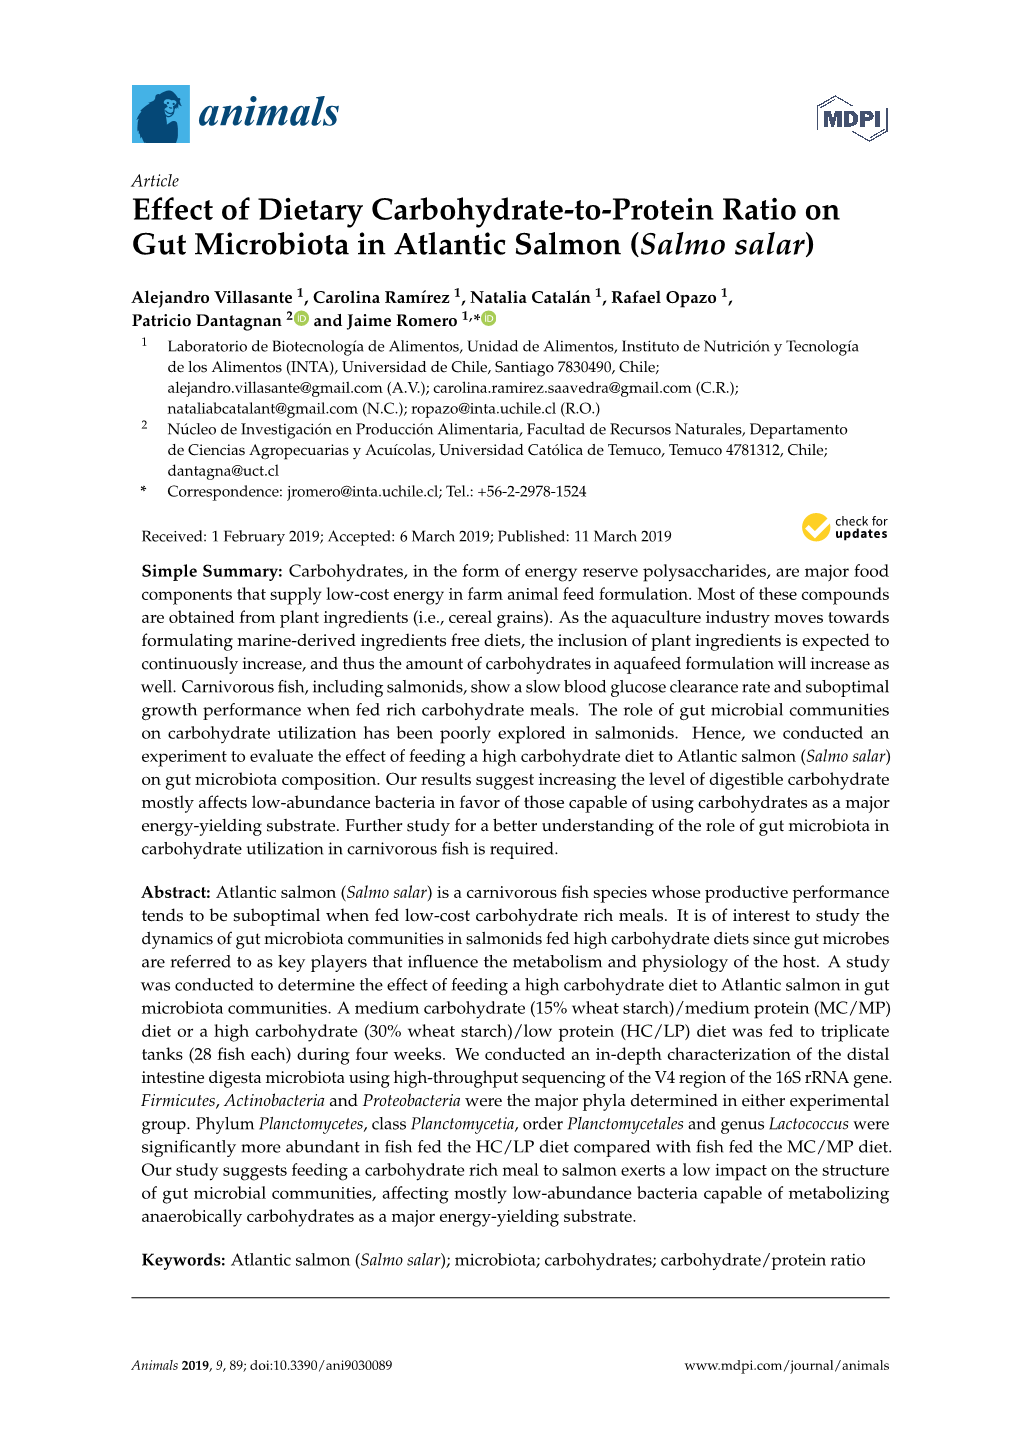 Effect of Dietary Carbohydrate-To-Protein Ratio on Gut Microbiota in Atlantic Salmon (Salmo Salar)